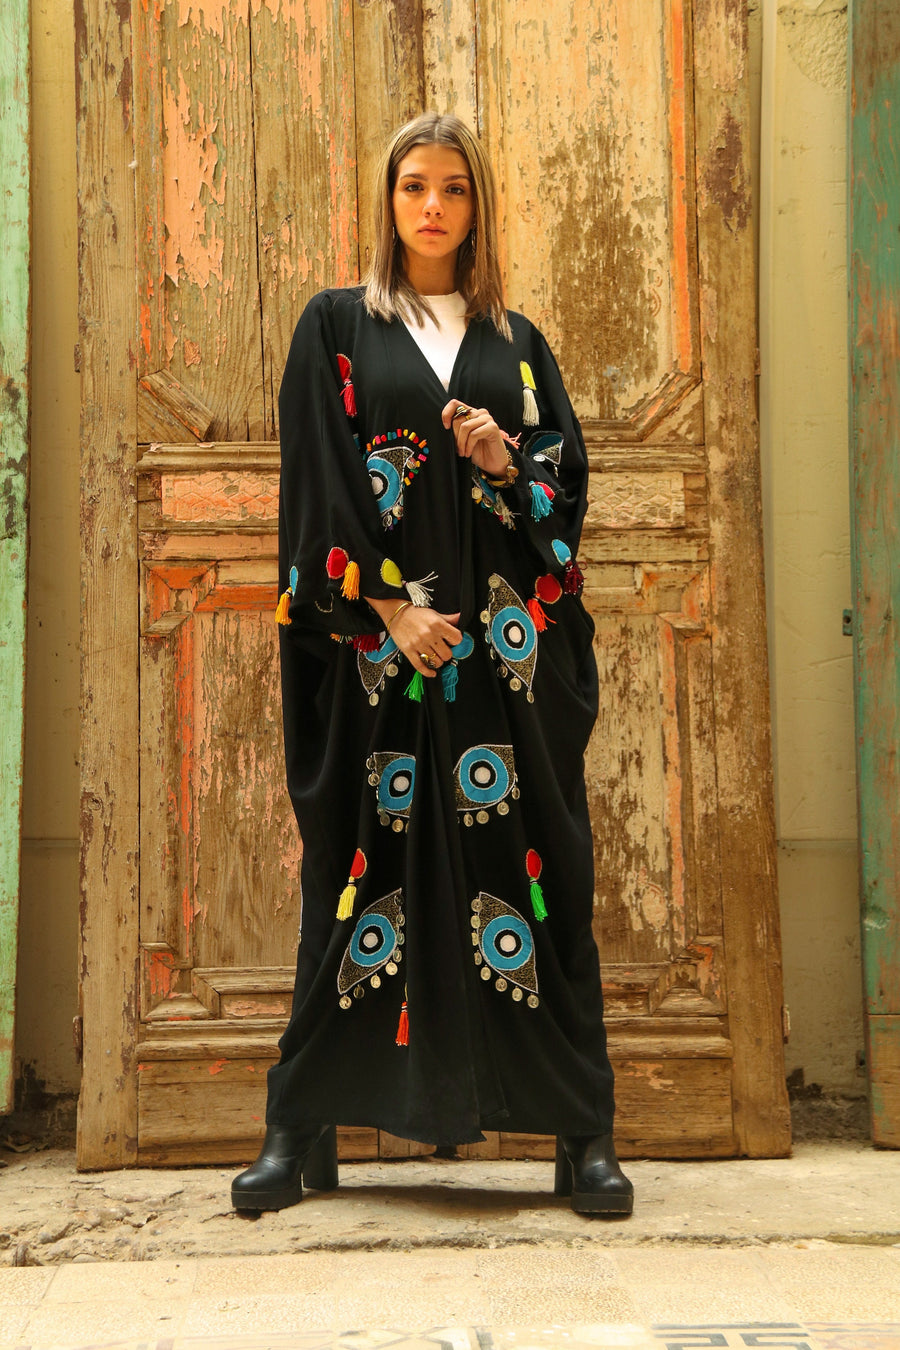 Evil eye Embroidered cardigan with tassels, Boho black Kimono Cardigan, Womens Cardigans, Boho Cardigan, Duster, Black Cardigan, Kimonos